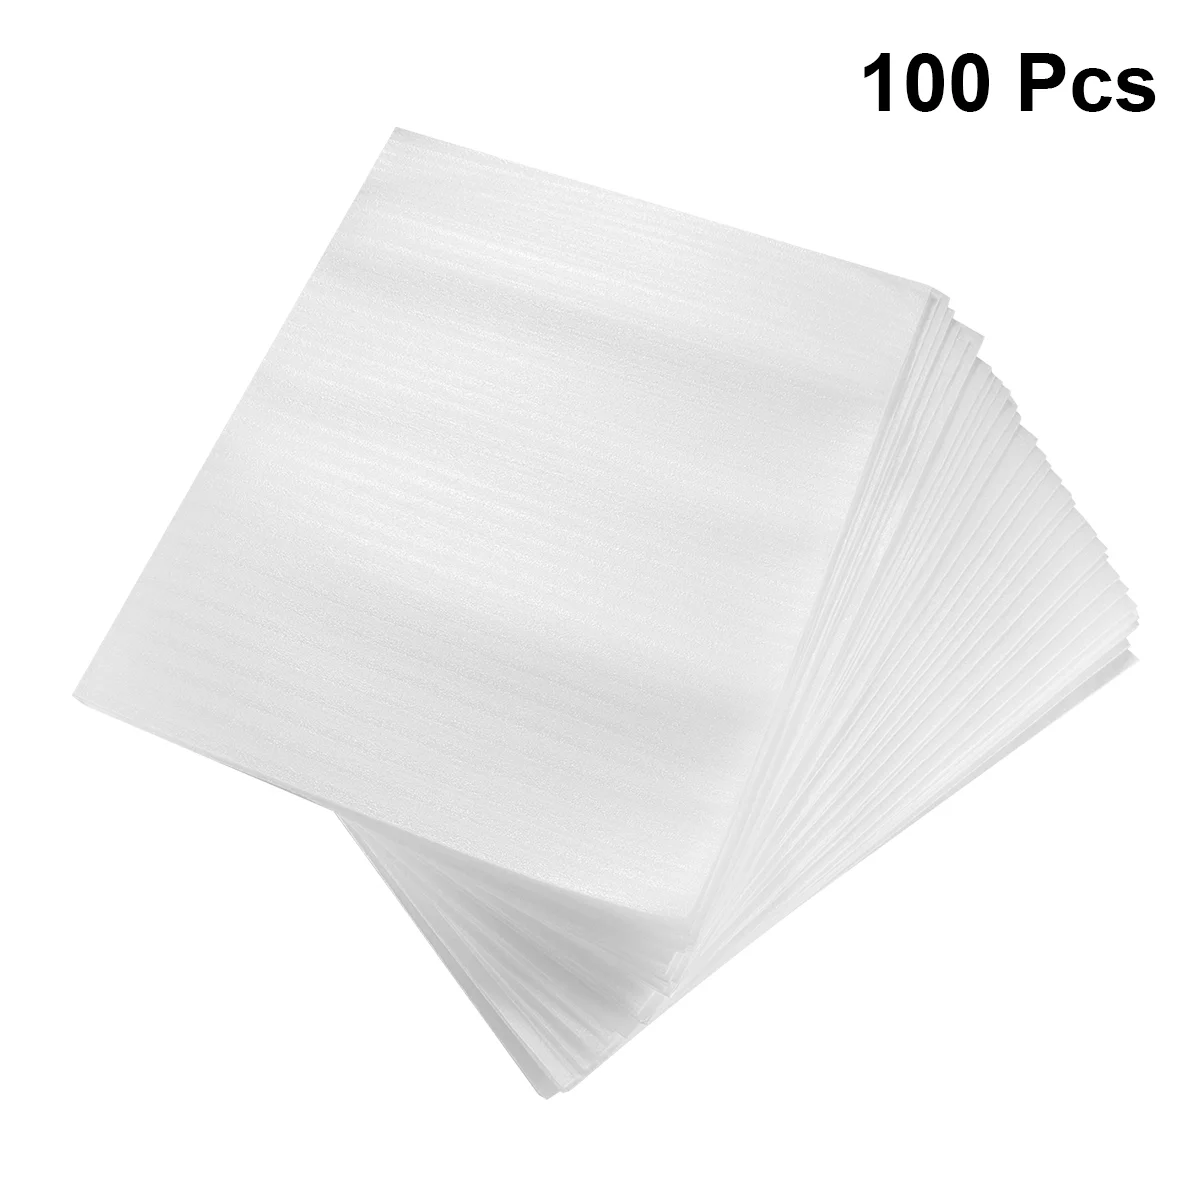 

Cushion Glasses Cushion Pouches Packing Wrapping Sheets Cushioning Padding Supplies Moving Glasses Dishes